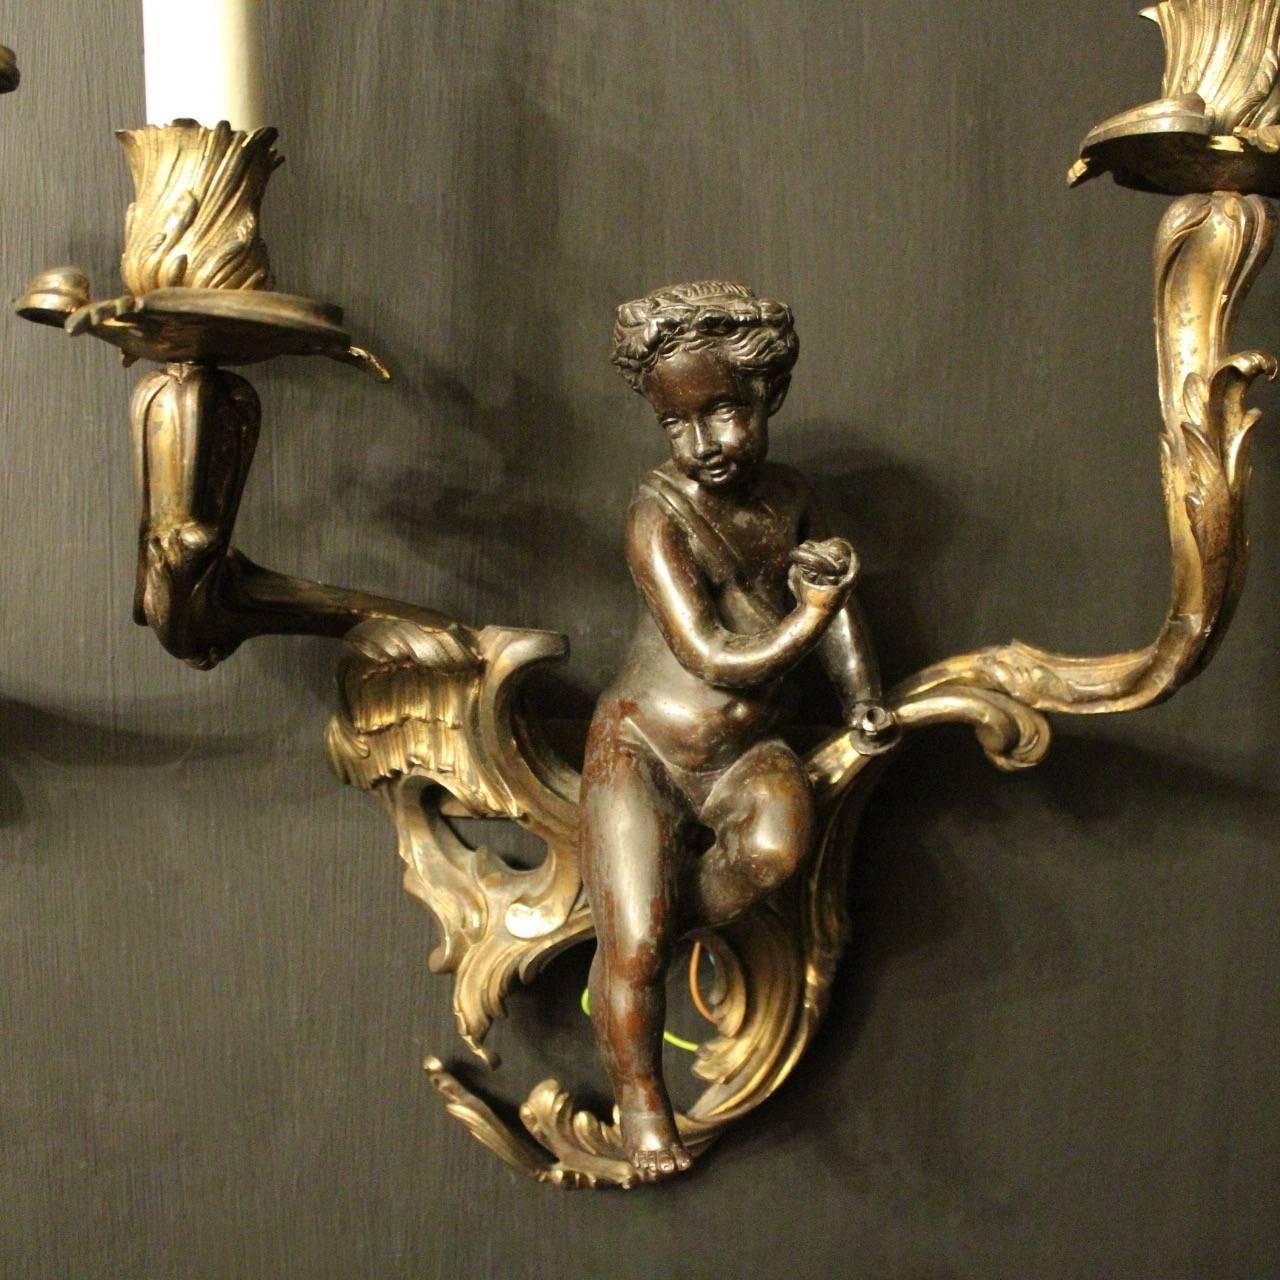 A French pair of gilded bronze twin arm antique wall sconces, the ornate leaf scrolling arms with leaf bobeches drip pans and bulbous candle sconces, issuing from a decorative leaf pierced scrolling backplate with lovely central cherubs, great